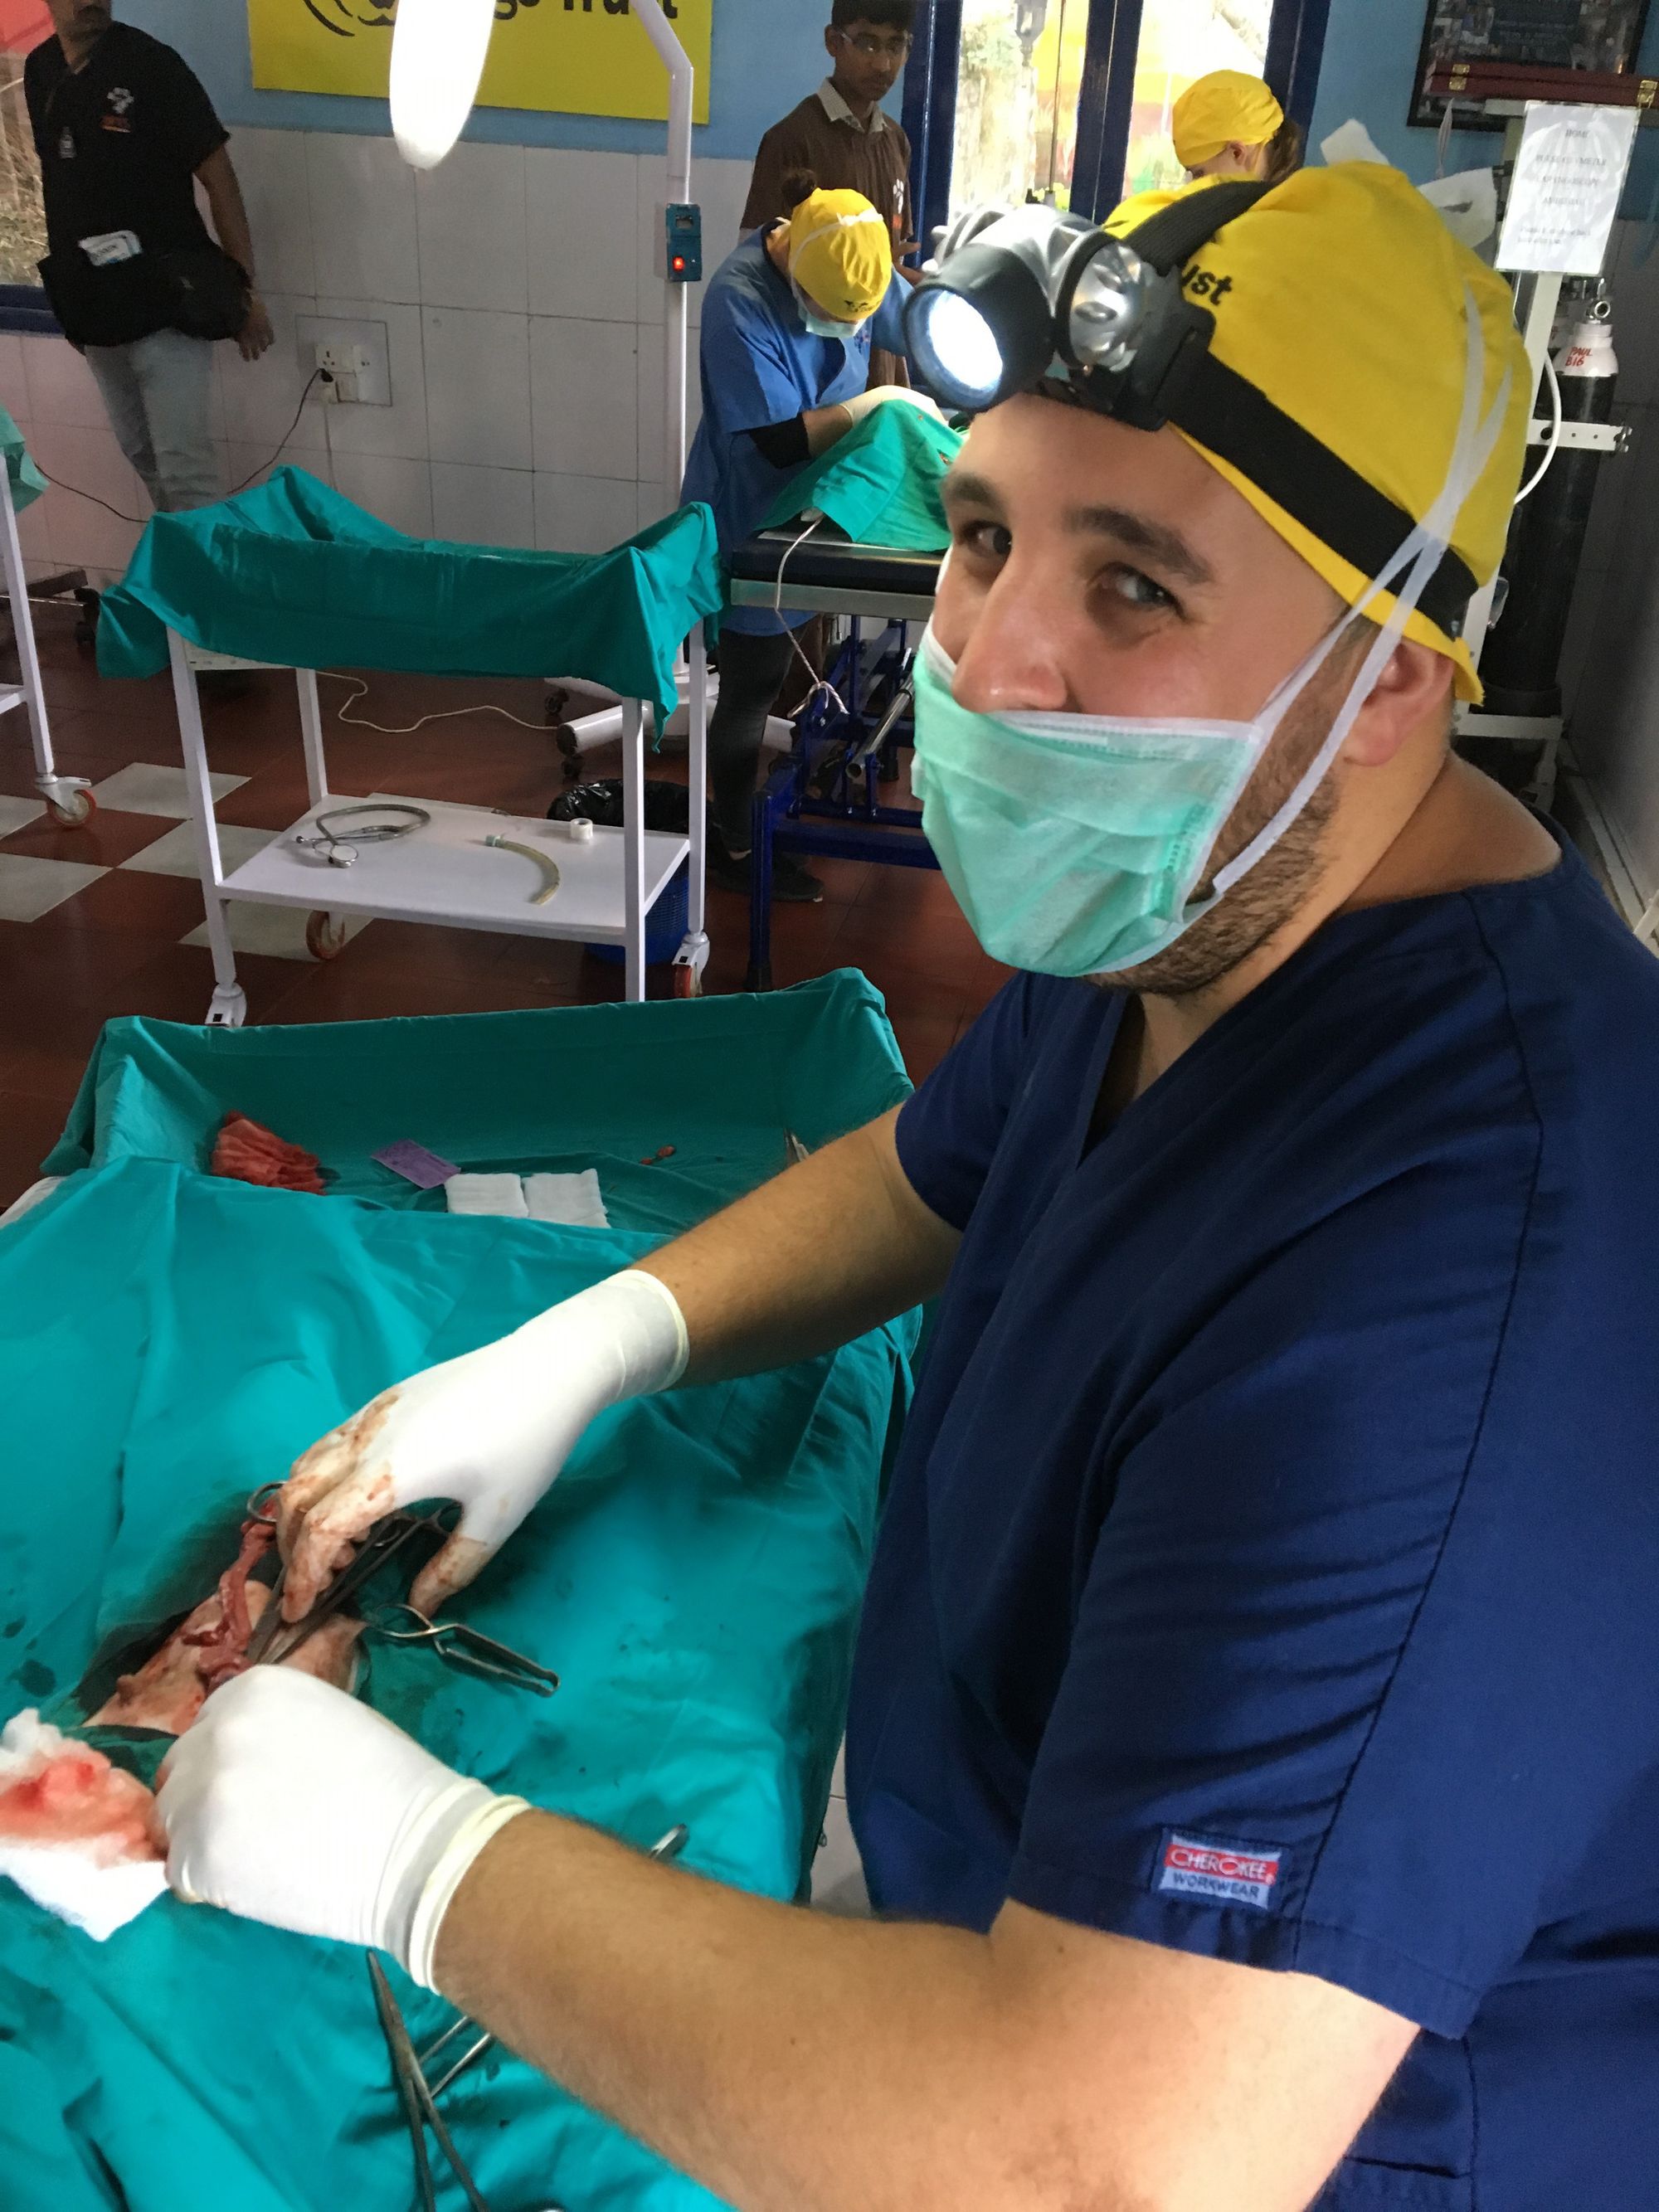 A Vet Student’s Experience in India: Lewis’ Story